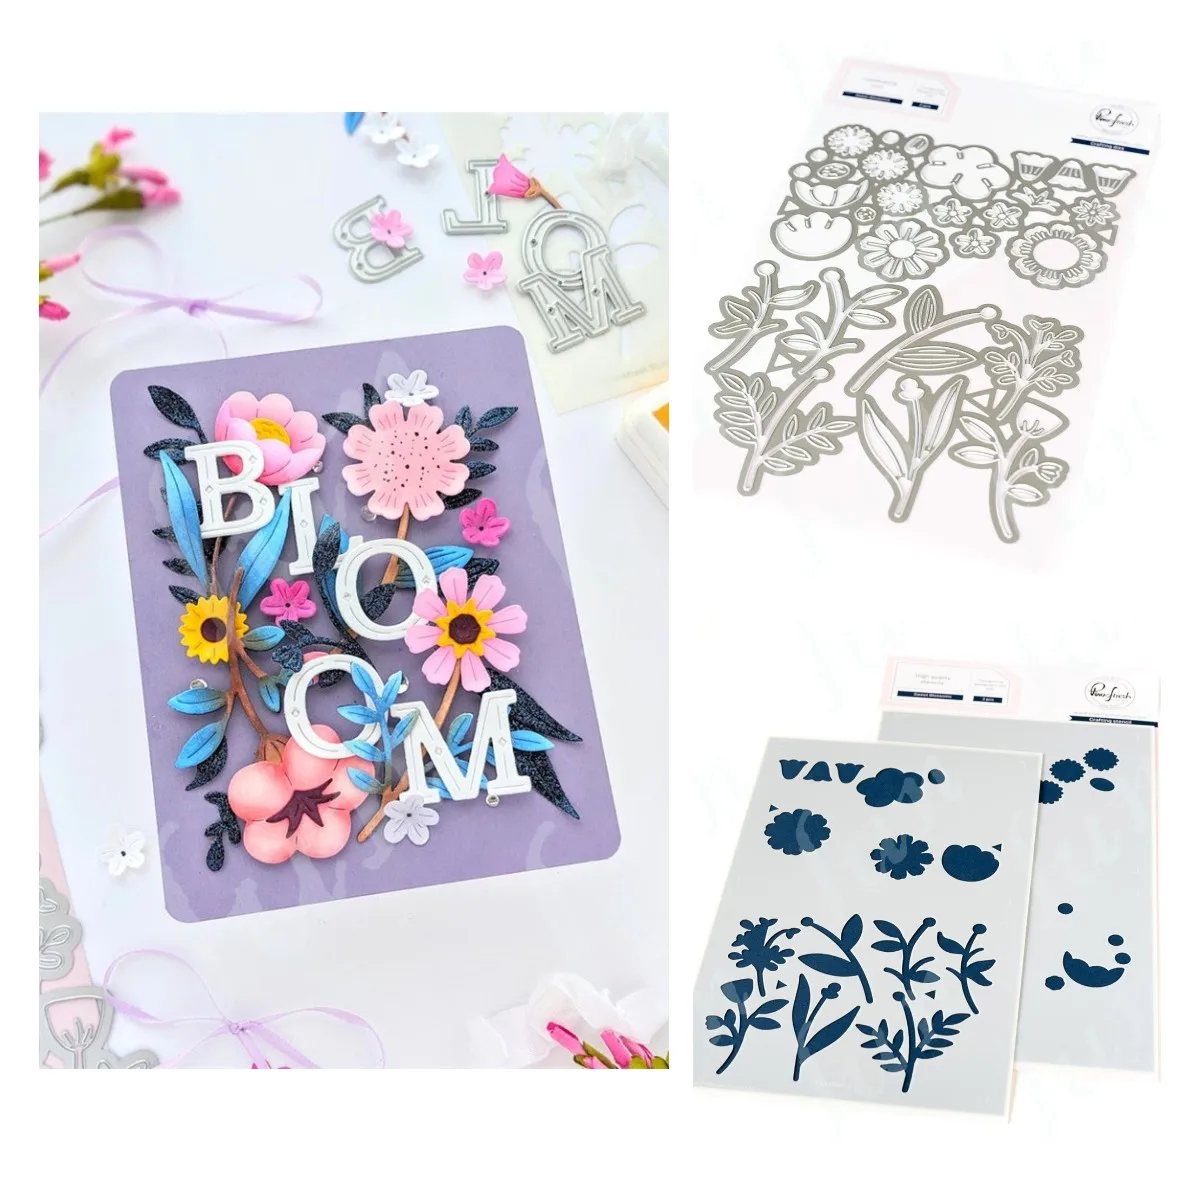 

New Arrival Sweet Blossoms Metal Cutting Dies Cut Die Mold Craft Stencils Decoration Embossing Template DIY Paper Card Handmade